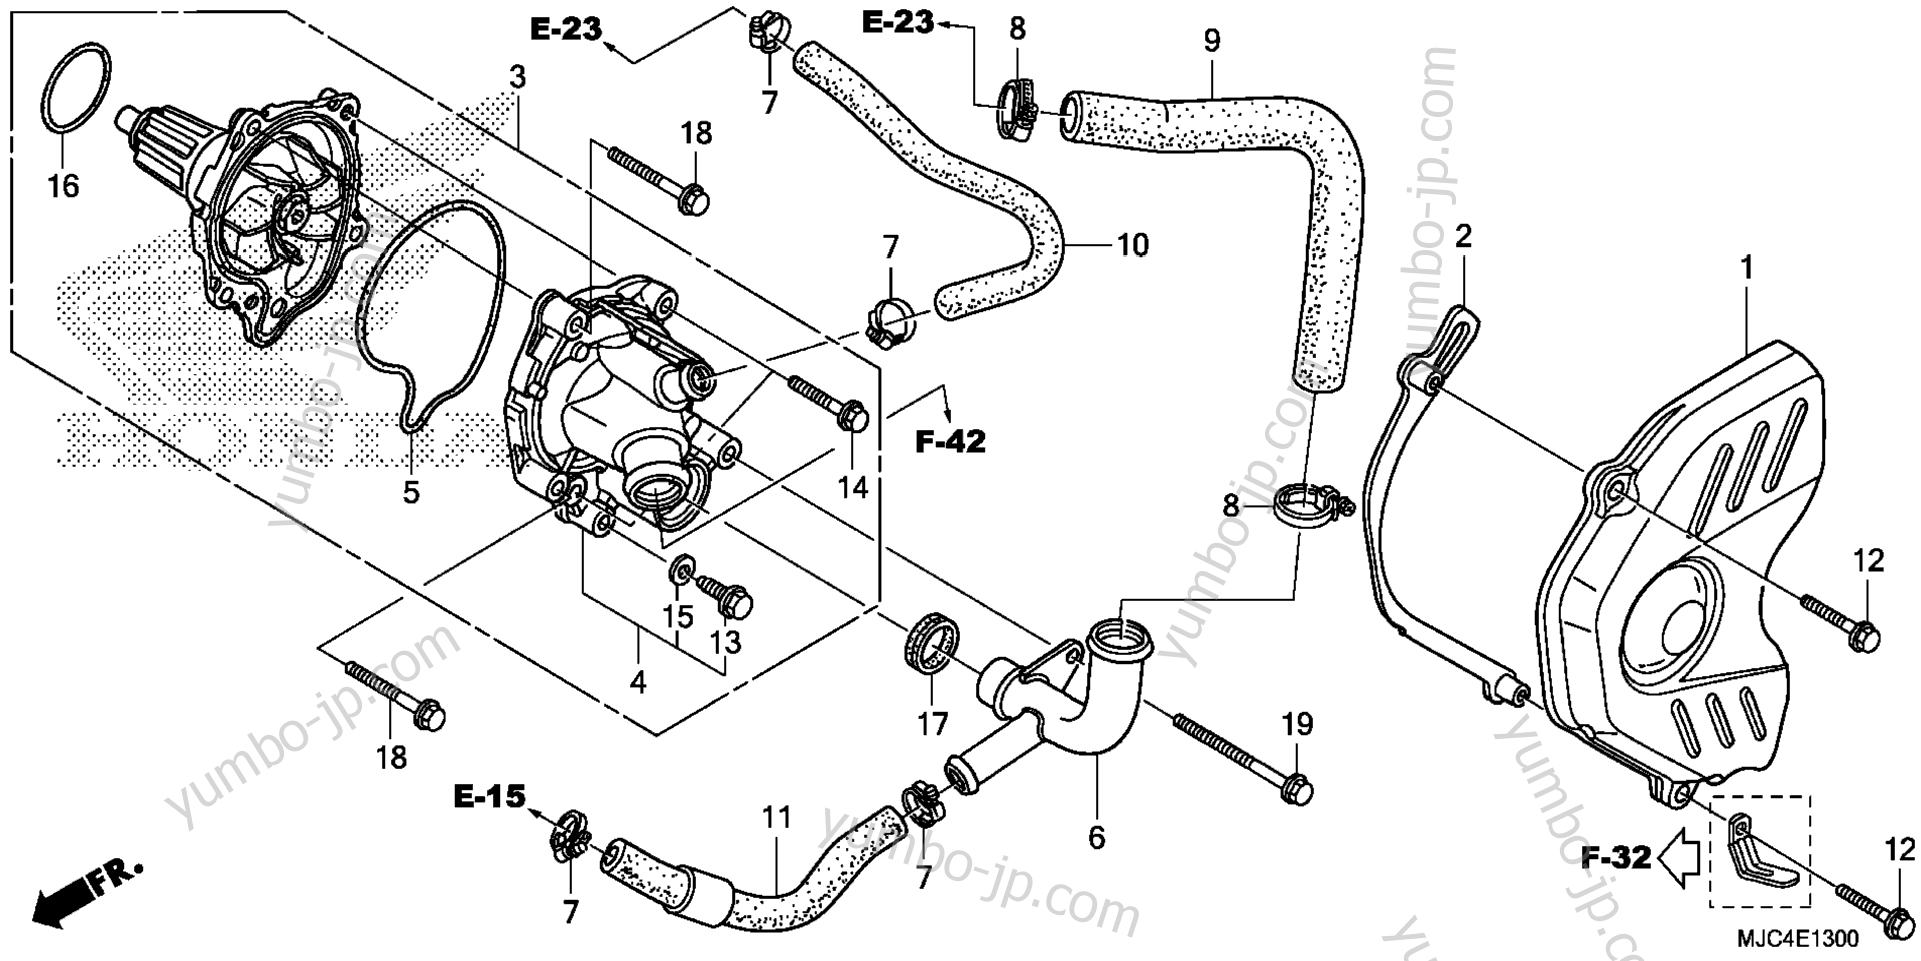 WATER PUMP for motorcycles HONDA CBR600RR 5AC 2013 year